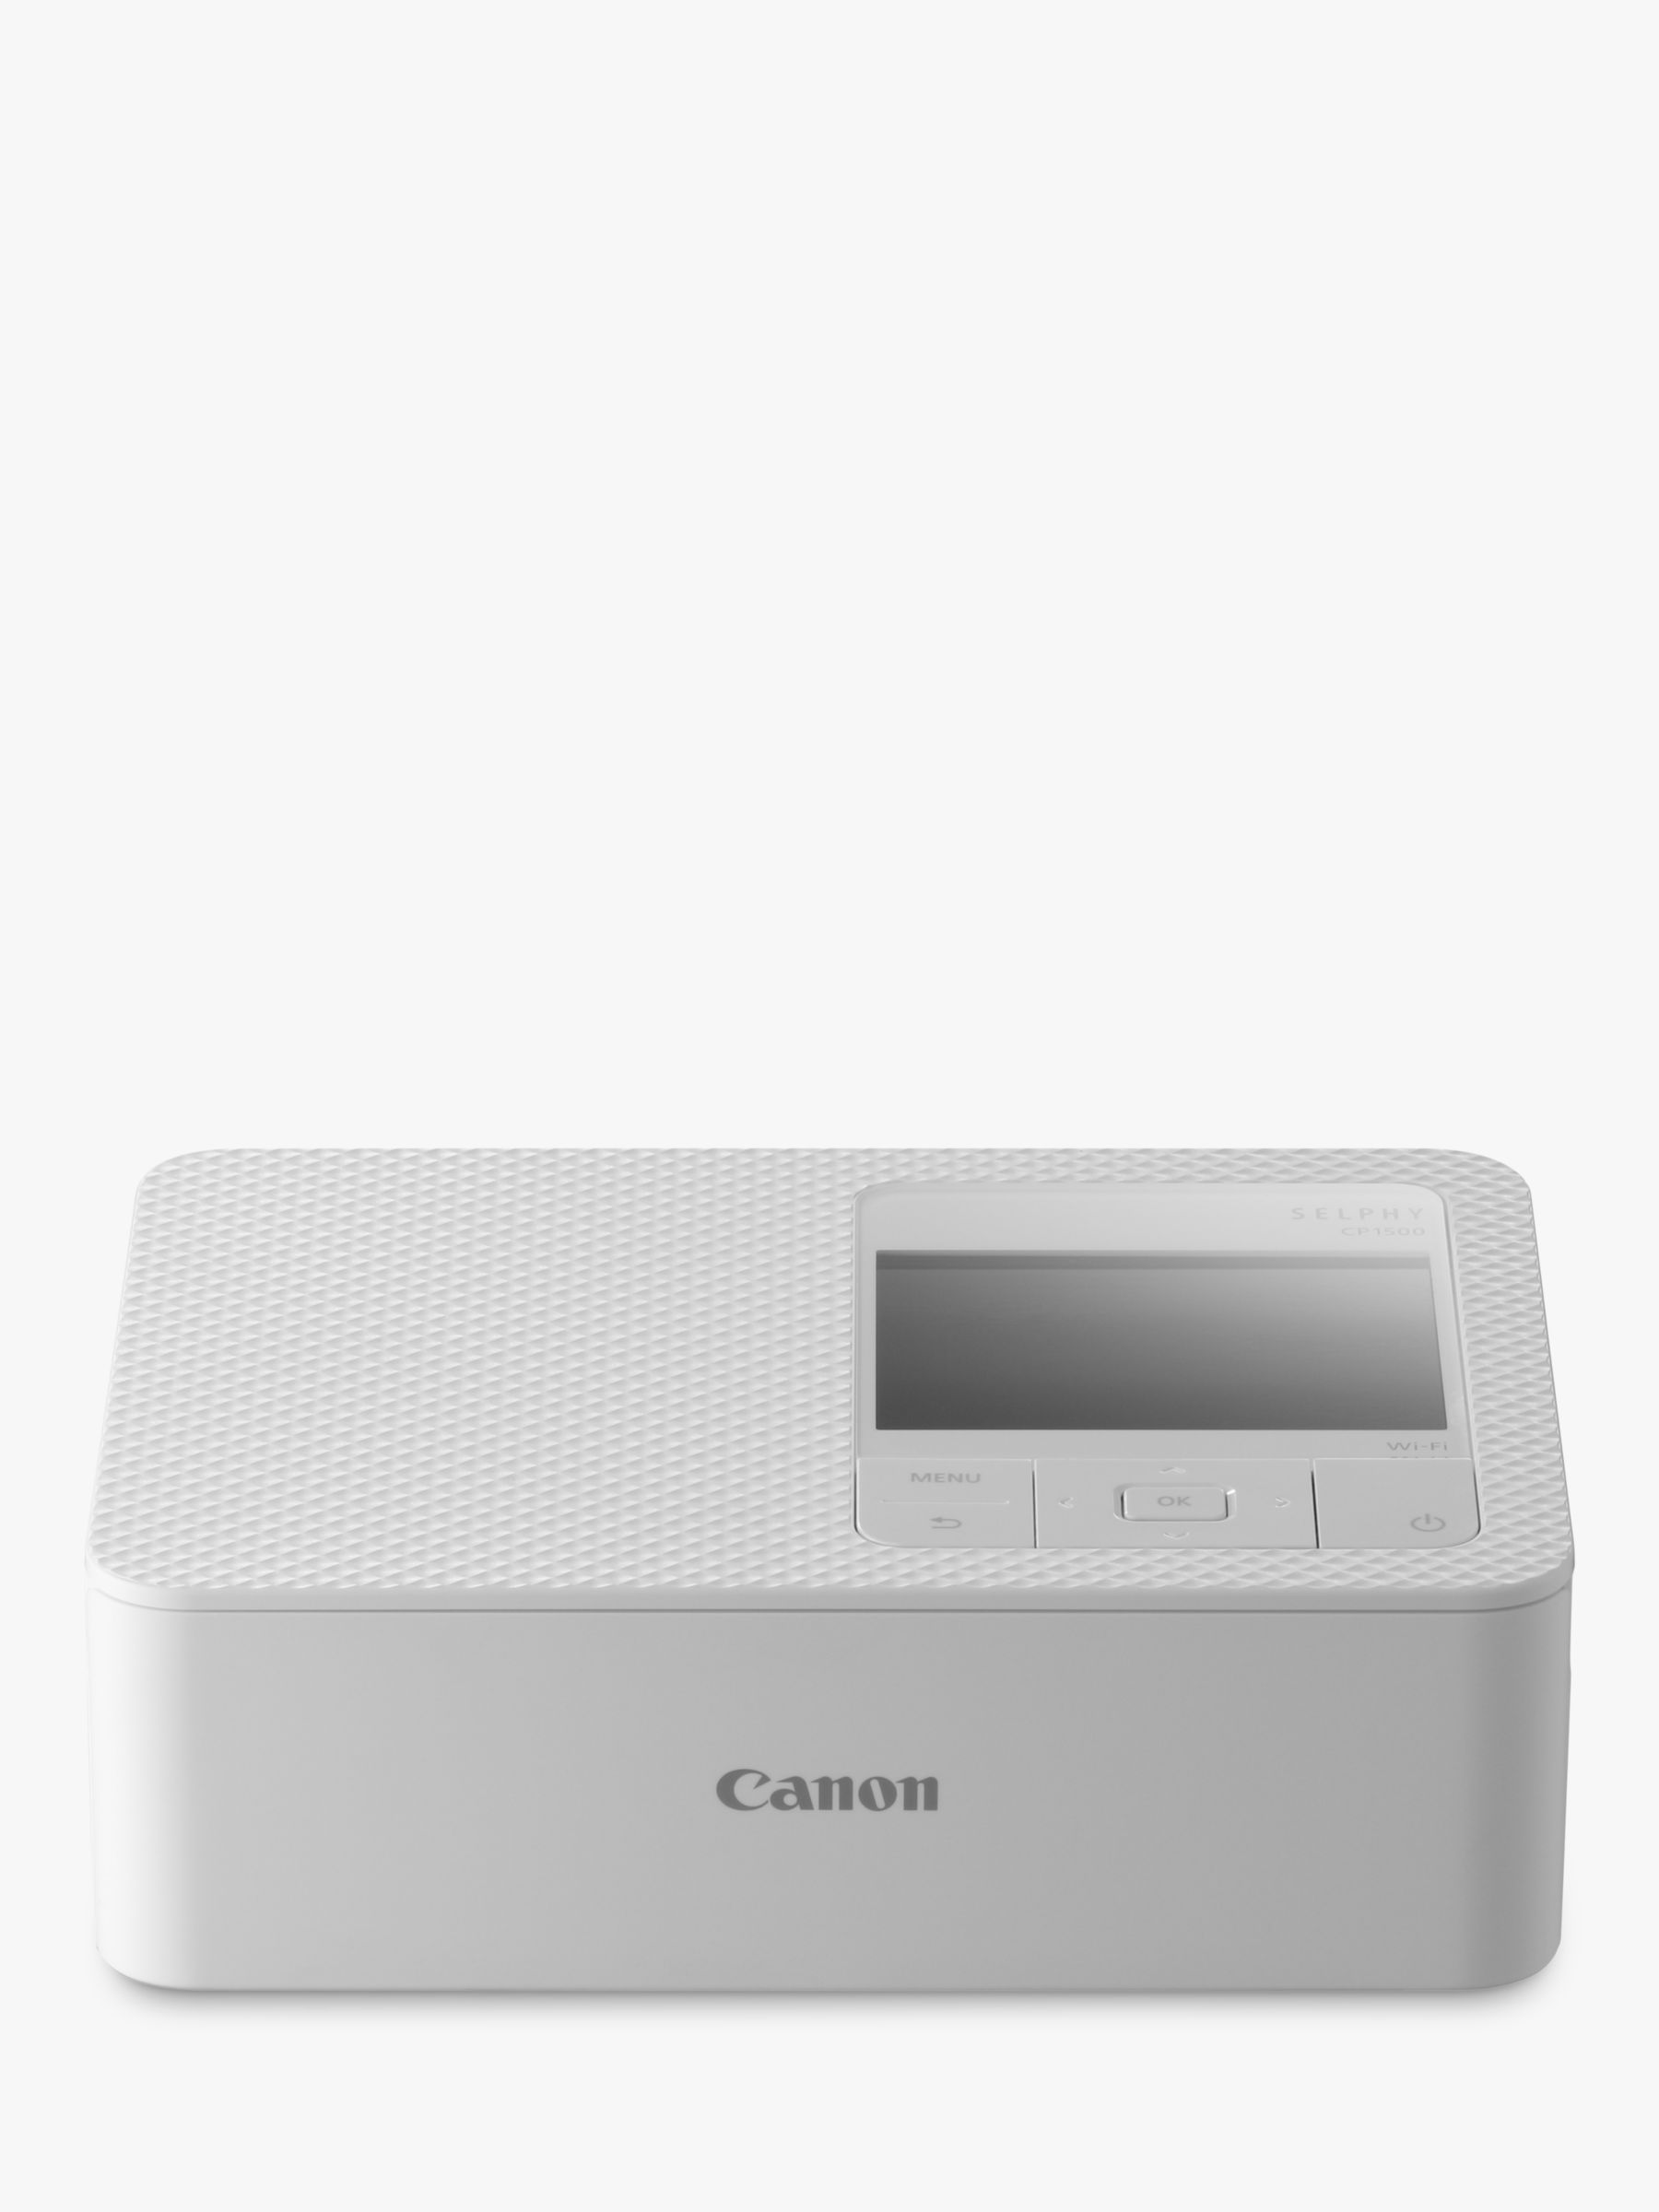 SELPHY CP1500 - Canon Europe